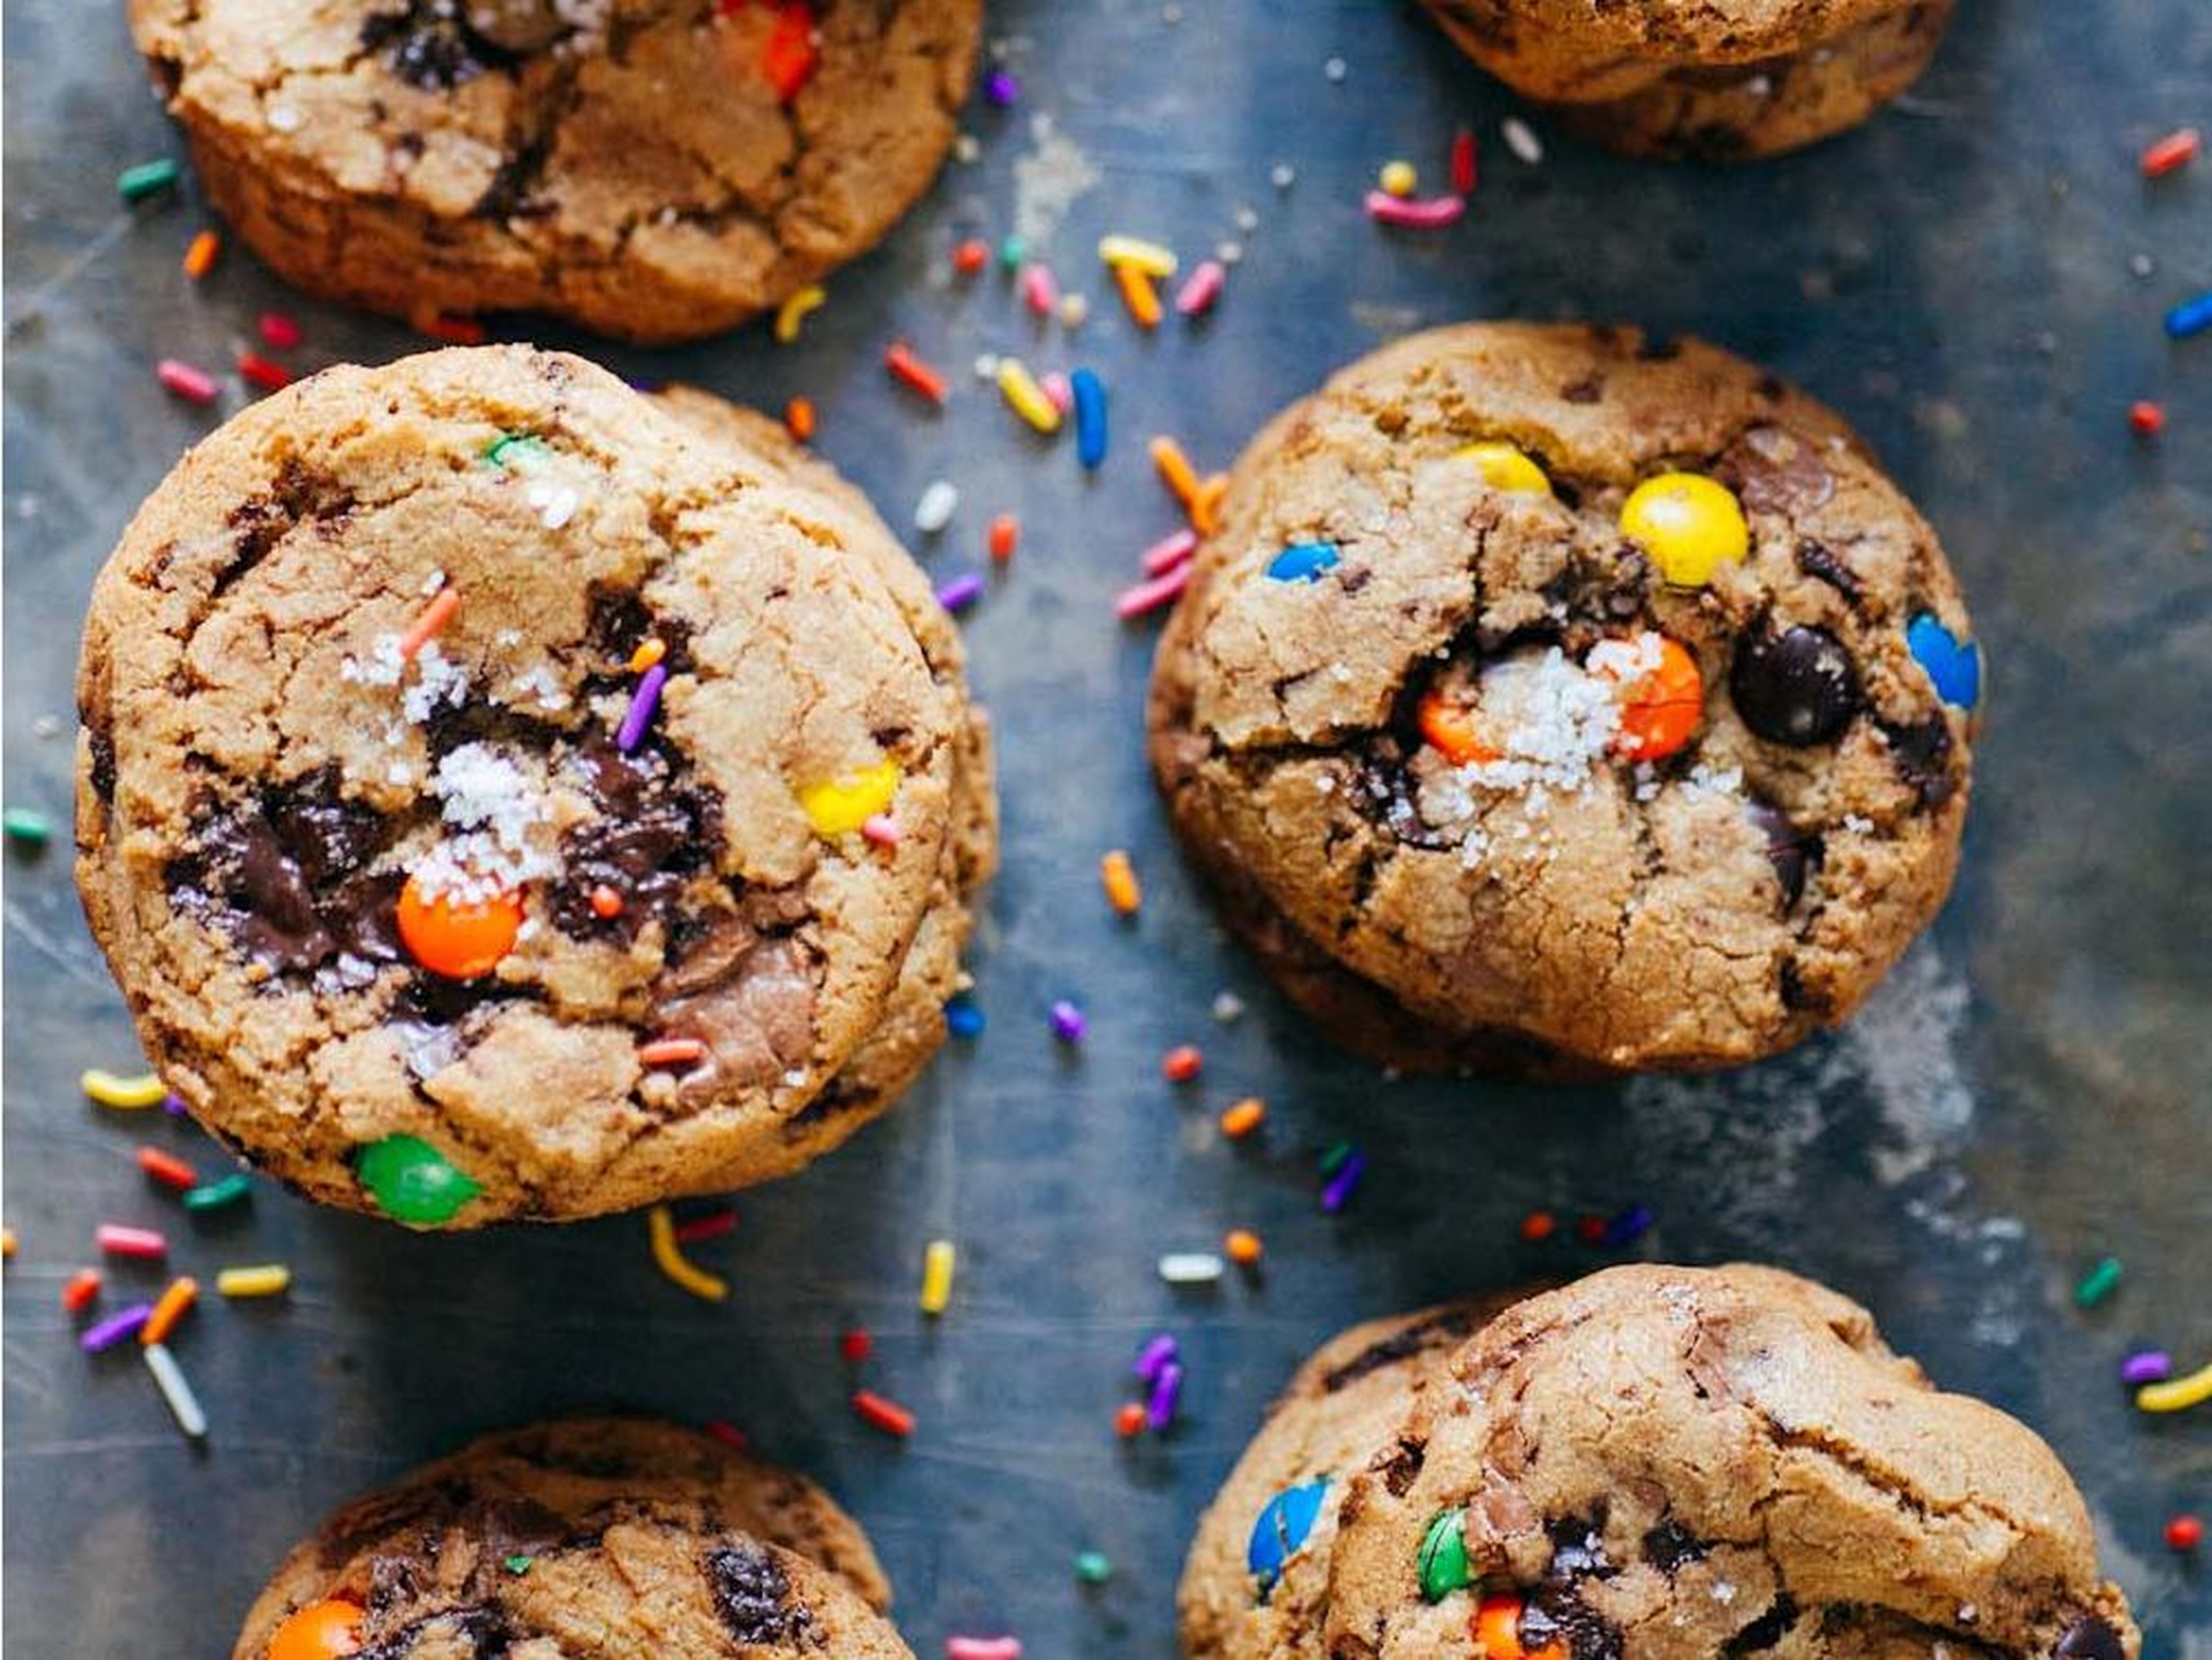 Chocolate chip cookies with candy and sprinkles.